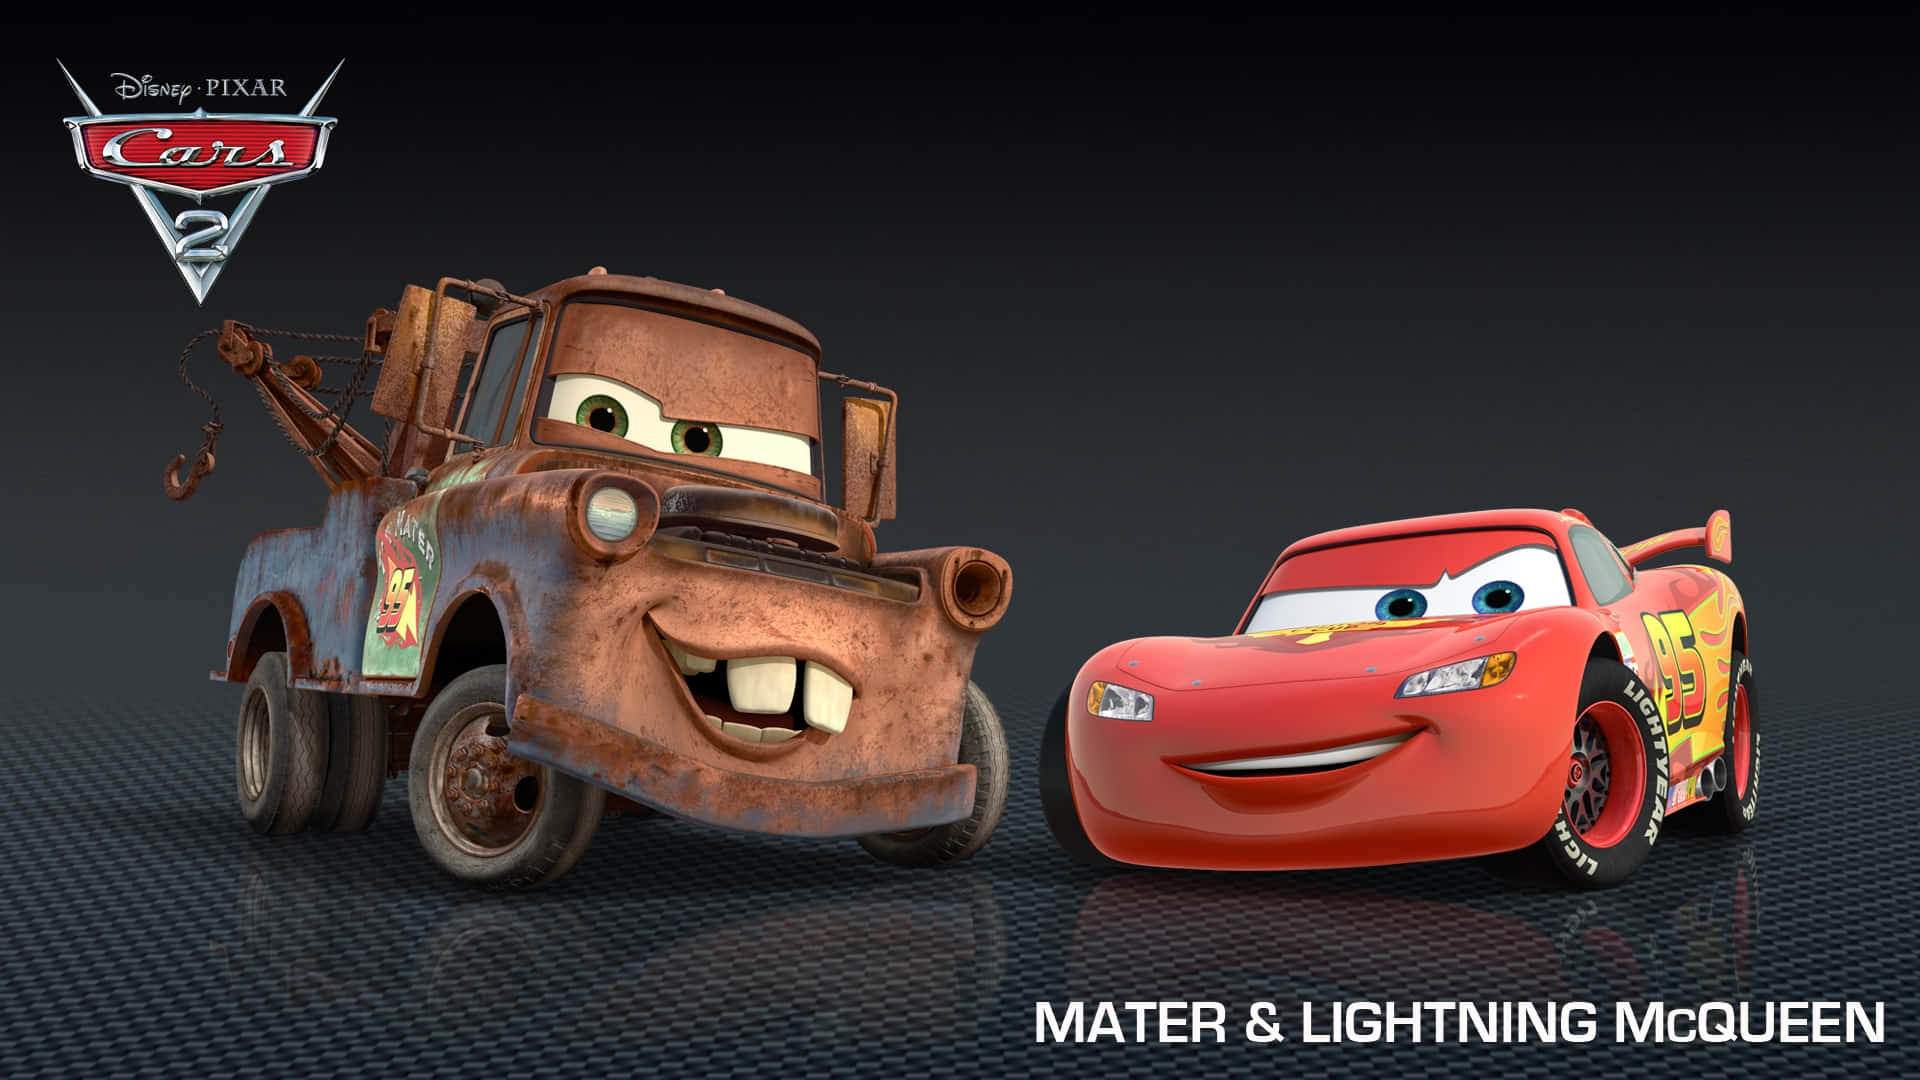 Lightning McQueen and Mater in an action-packed race